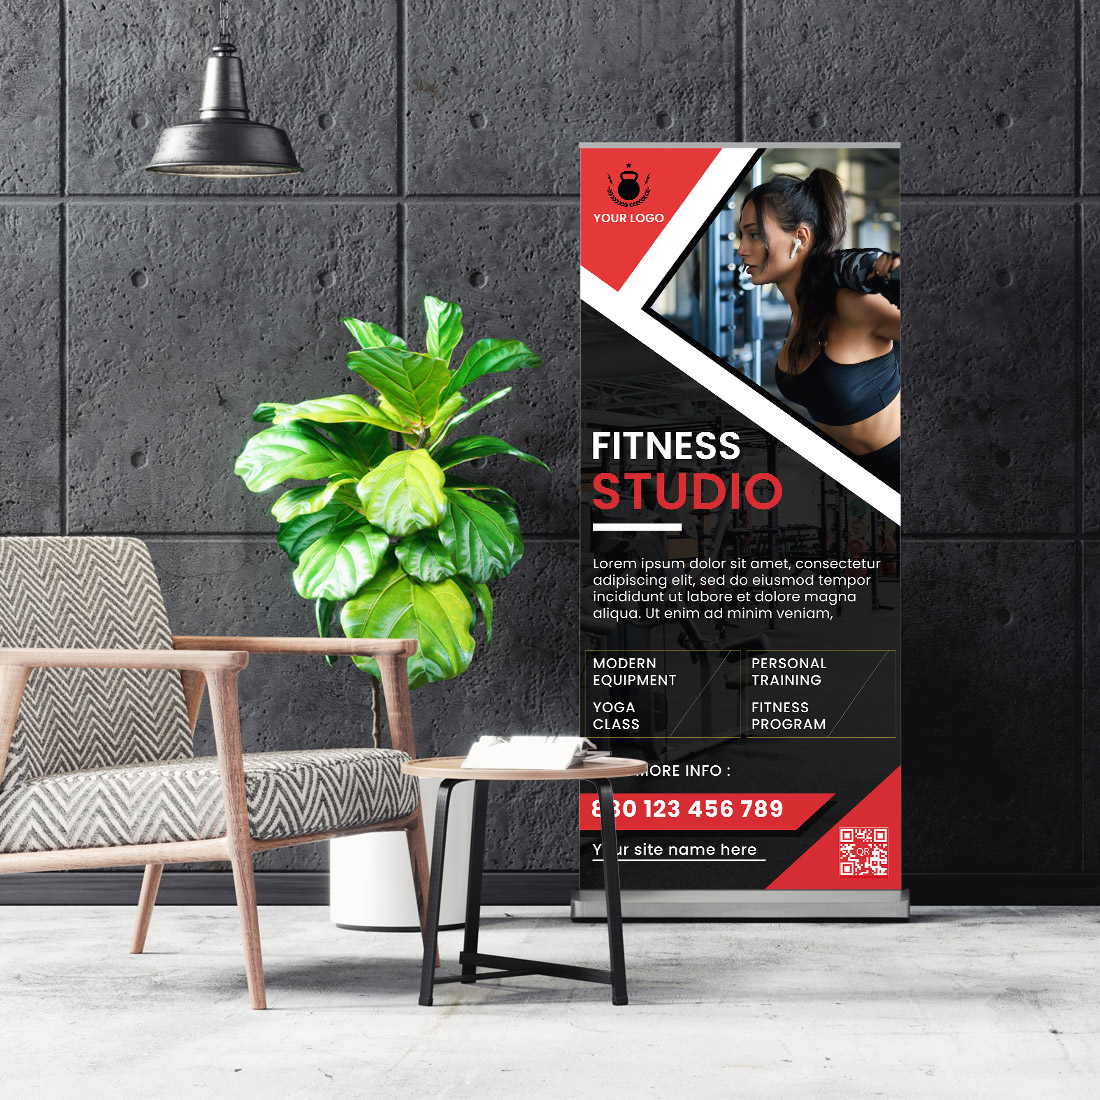 Fitness studio sign next to a chair and a potted plant.